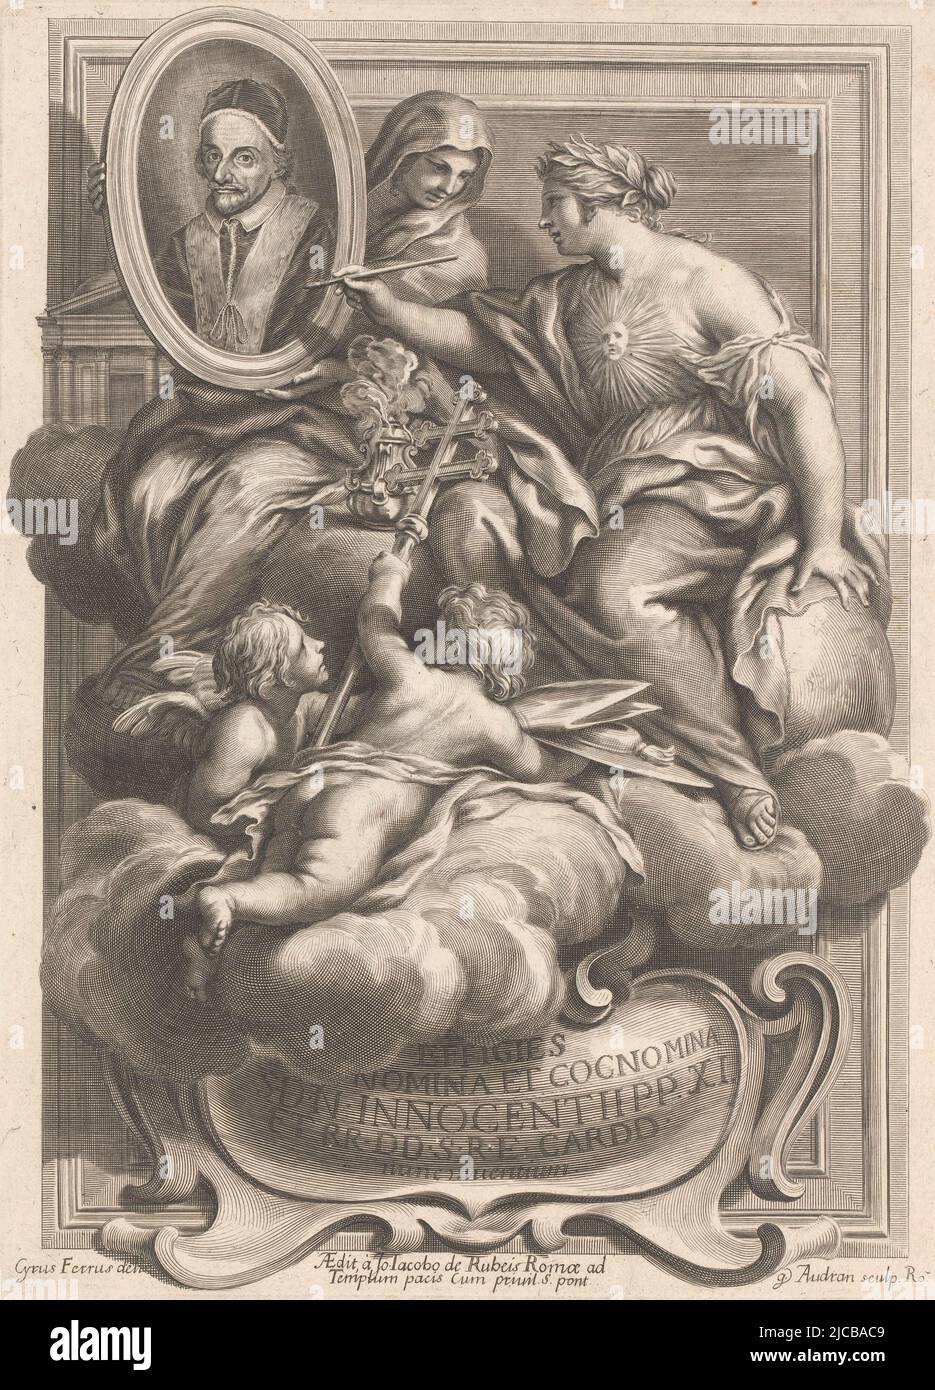 Representation with allegorical figures on a cloud A figure with laurel wreath, sun shield and globe paints the portrait of Pope Innocent XI while the portrait is supported by a veiled woman At their feet several putti with papal attributes, Pope Innocent XI with allegorical figures Effigies nomina et cocnomina SDN Innocentii PP XI  , print maker: Gérard Audran, (mentioned on object), intermediary draughtsman: Ciro Ferri, (mentioned on object), publisher: Giovanni Giacomo de'Rossi, (mentioned on object), print maker: Rome, publisher: Rome, Vaticaanstad, 1667 - 1670, paper, engraving, h 274 mm Stock Photo